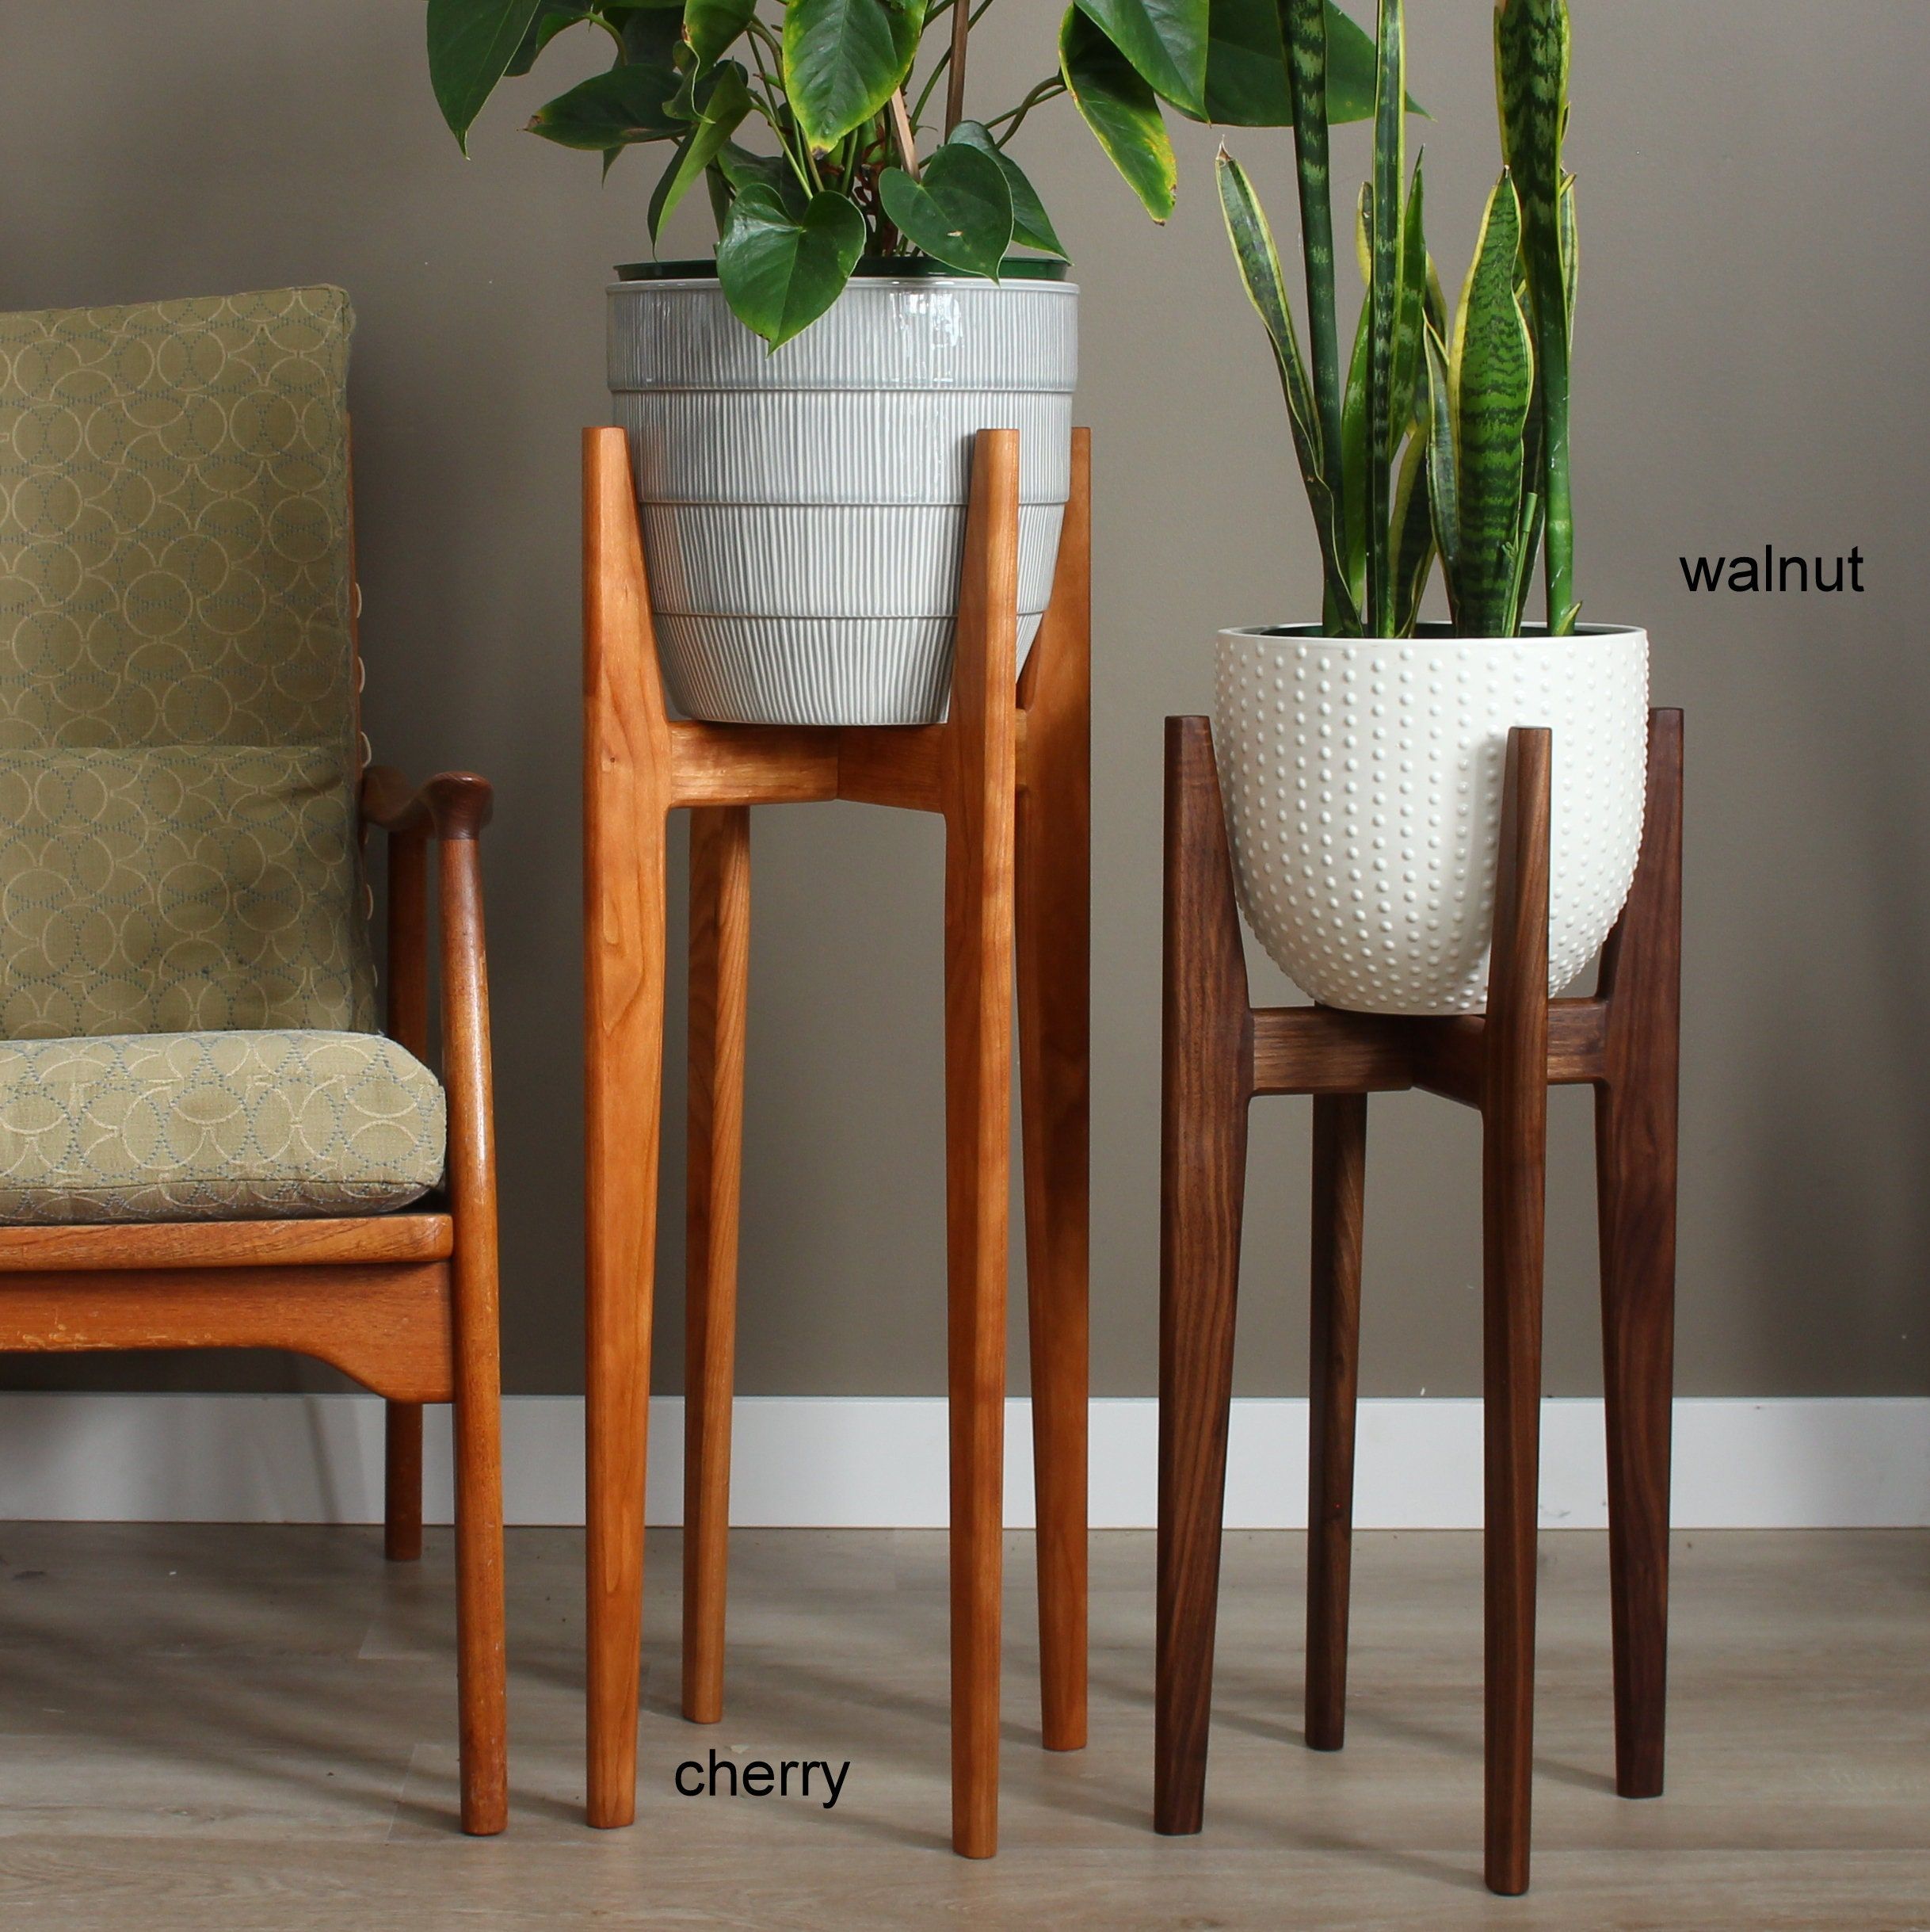 Mid Century Modern Plant Stand Our Original Design Indoor – Etsy Throughout Wooden Plant Stands (View 2 of 15)